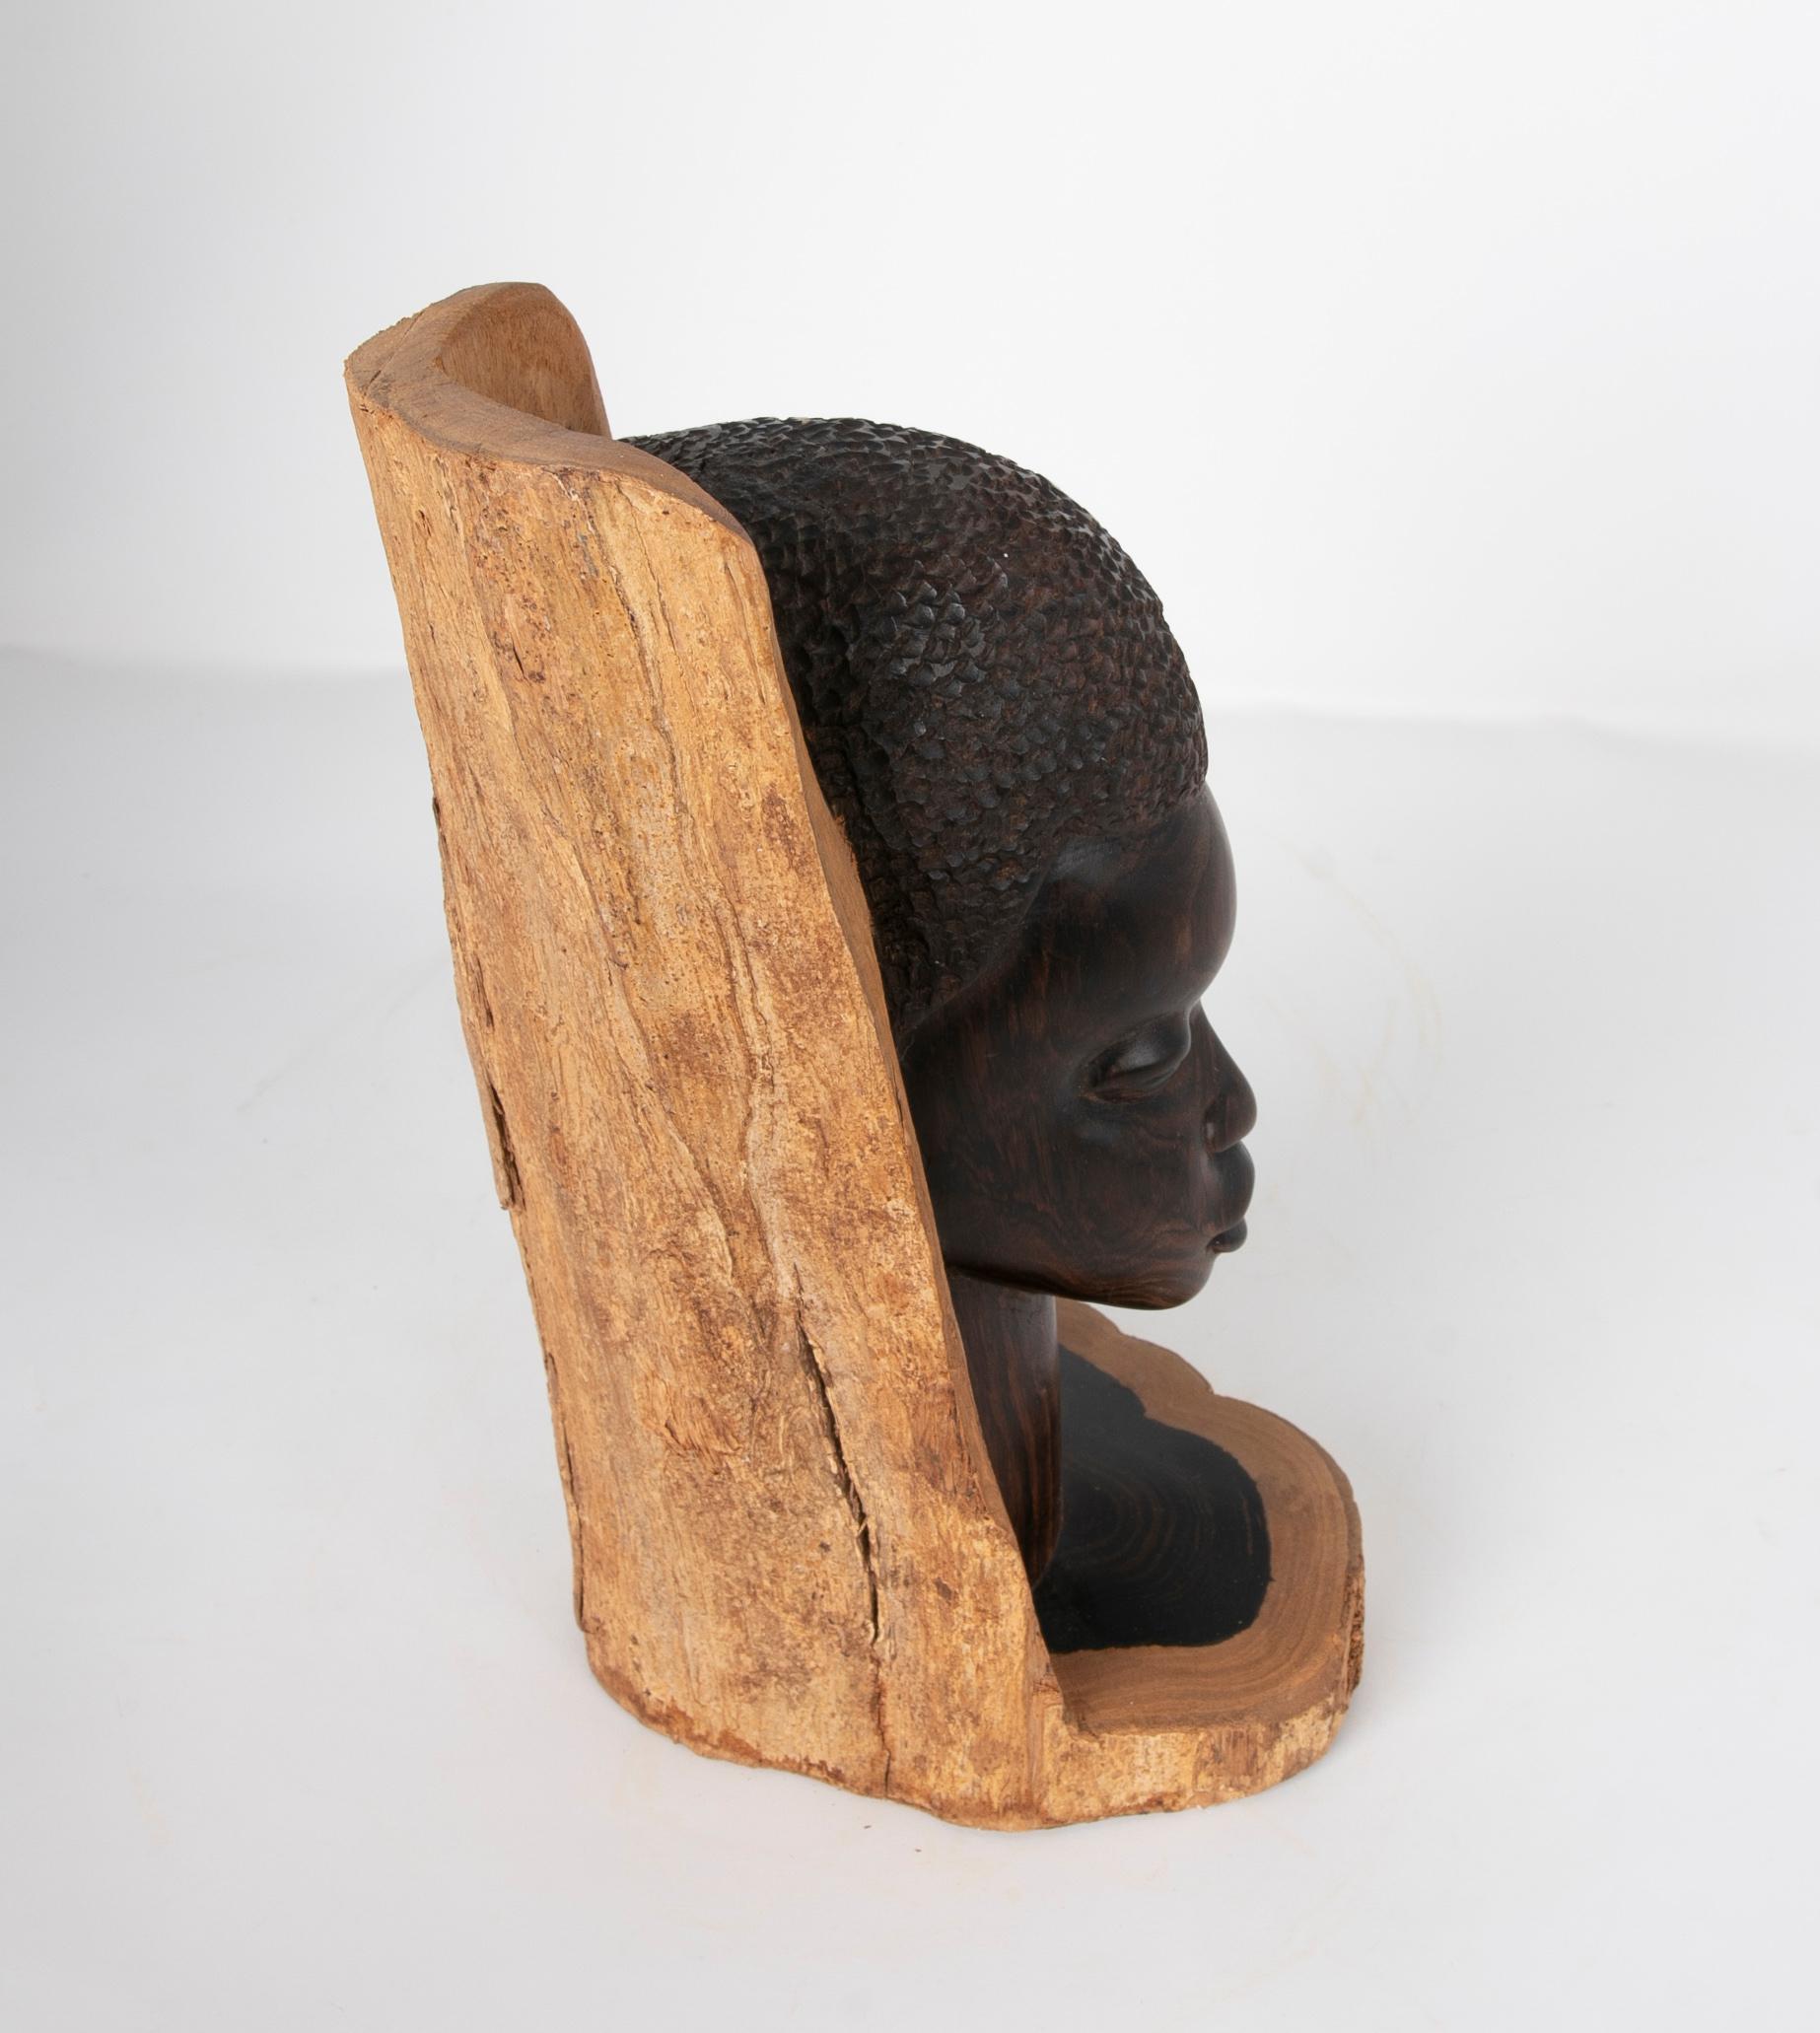 Wood-Carved Sculpture of a Tanzanian Woman Signed and Dated 1922 For Sale 4